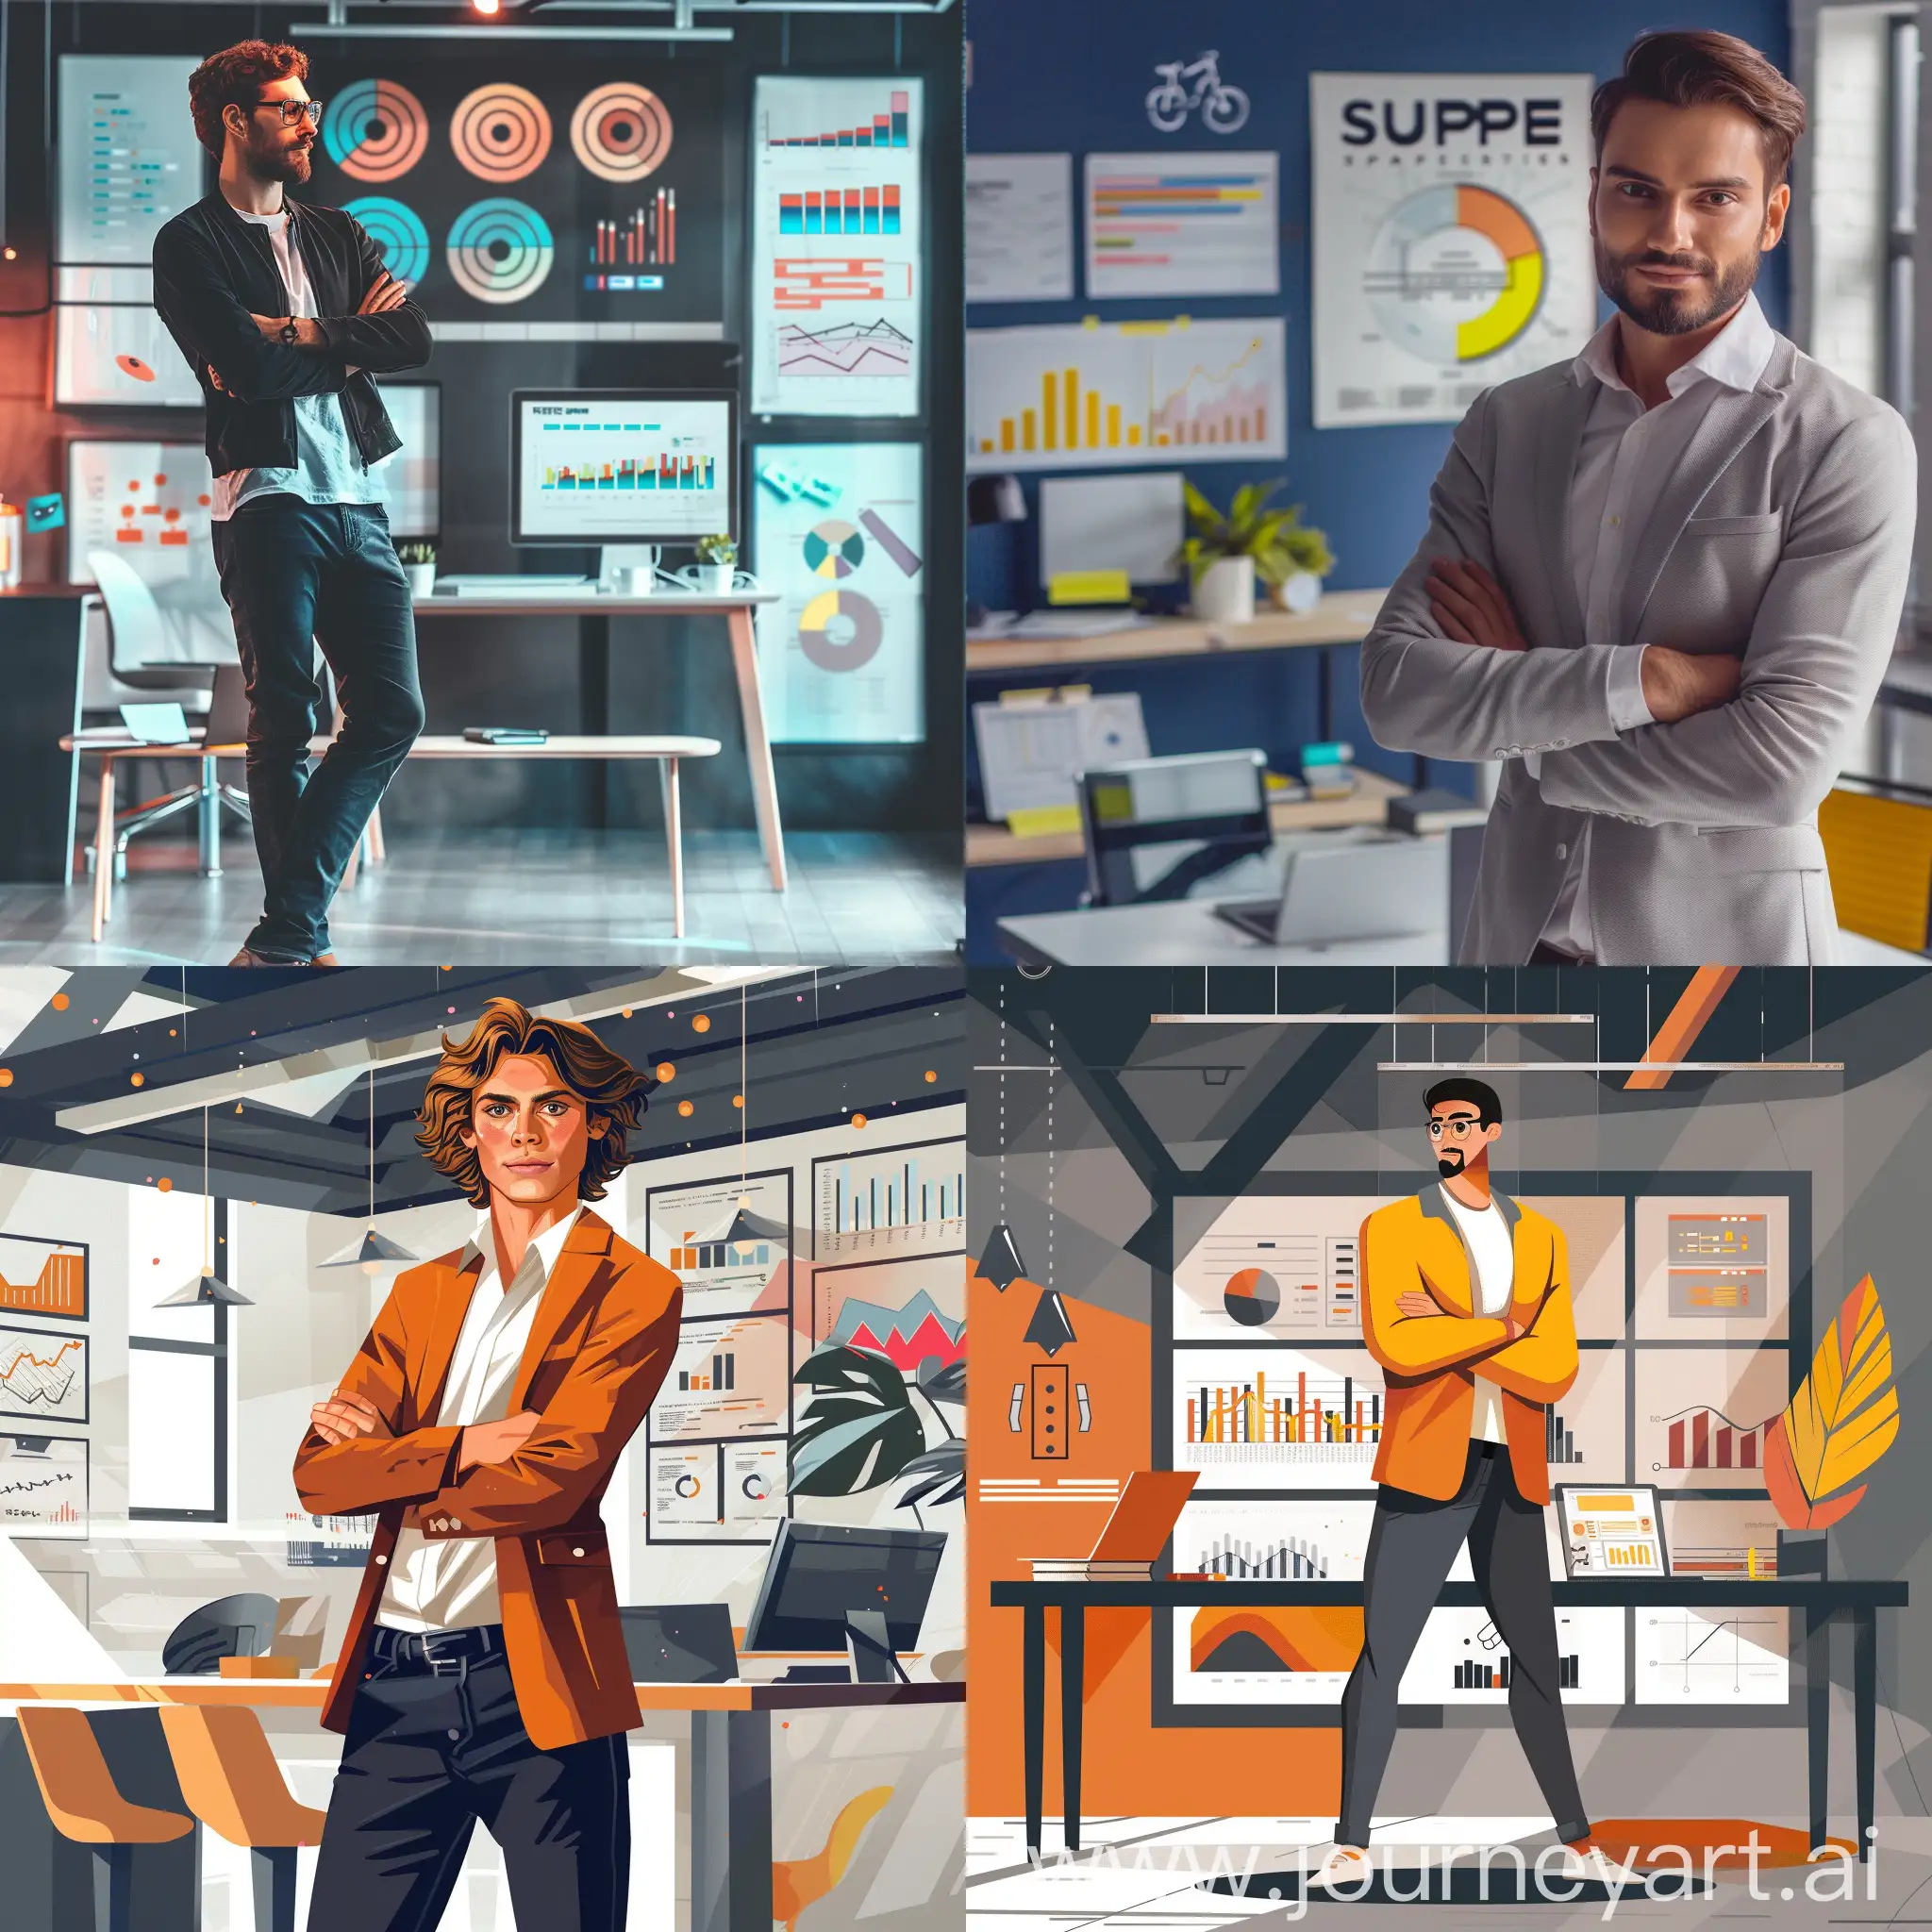 Create a visually striking and original image designed to capture the essence of a "super seller" for an iStock listing. The scene should feature a confident, dynamic salesperson standing in a modern, sleek office environment. The salesperson is depicted in a powerful pose, possibly with arms crossed or holding a tablet, exuding confidence and expertise. The office background includes elements like charts, graphs, or sales awards to emphasize success and professionalism. Use vibrant colors and sharp contrasts to make the image eye-catching and compelling.